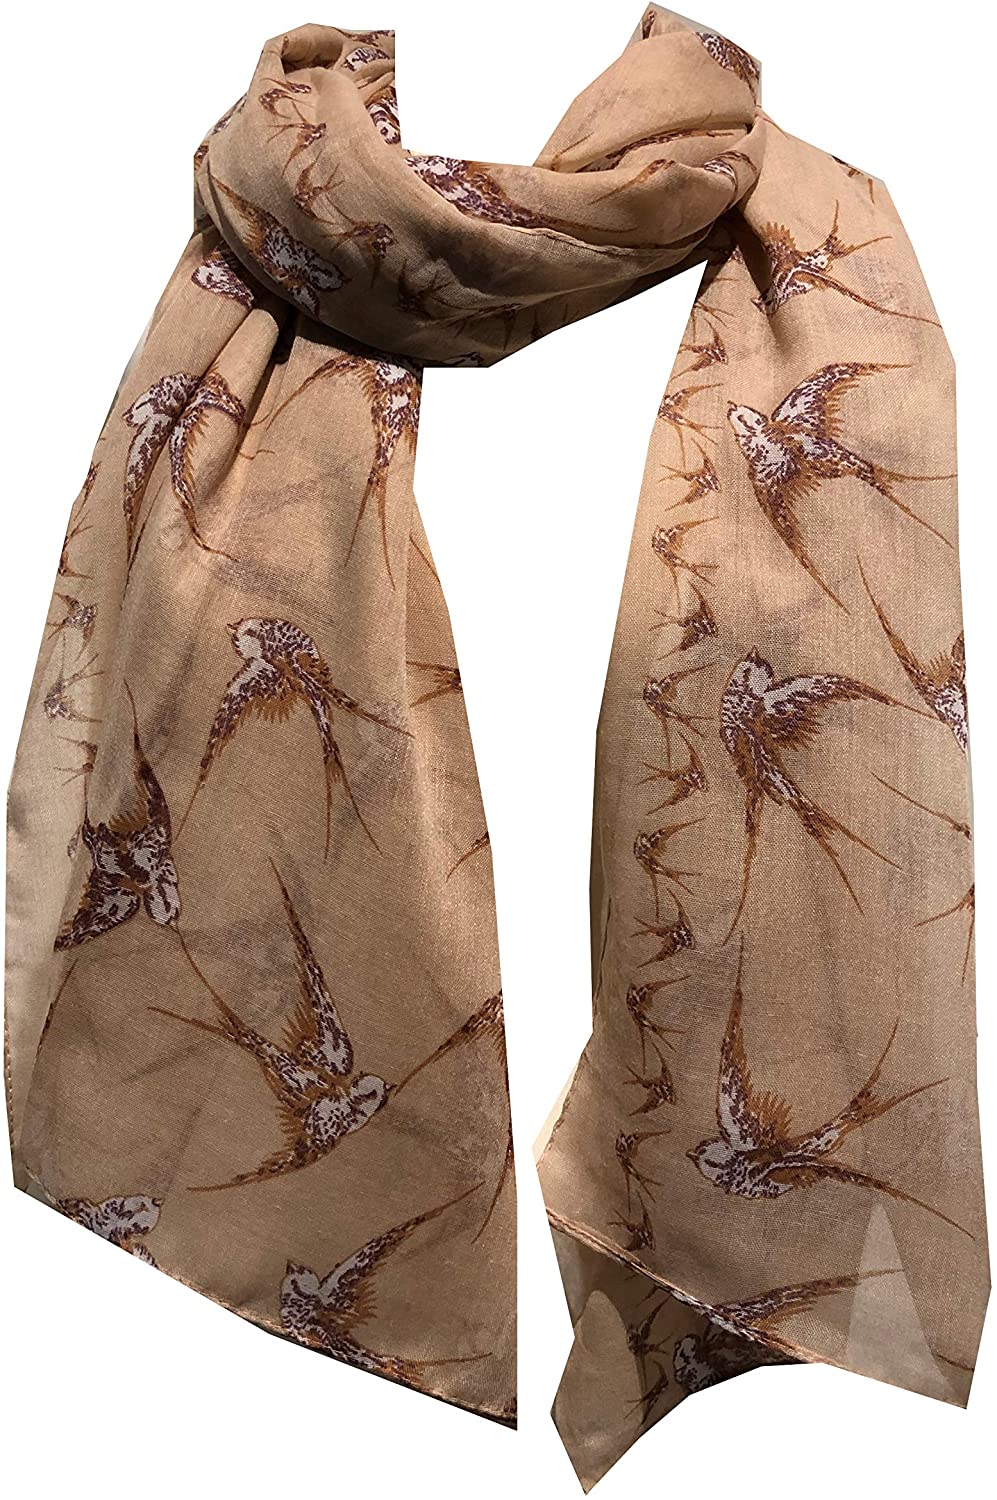 Pamper Yourself Now Beige/Peach Big Swallow Scarf